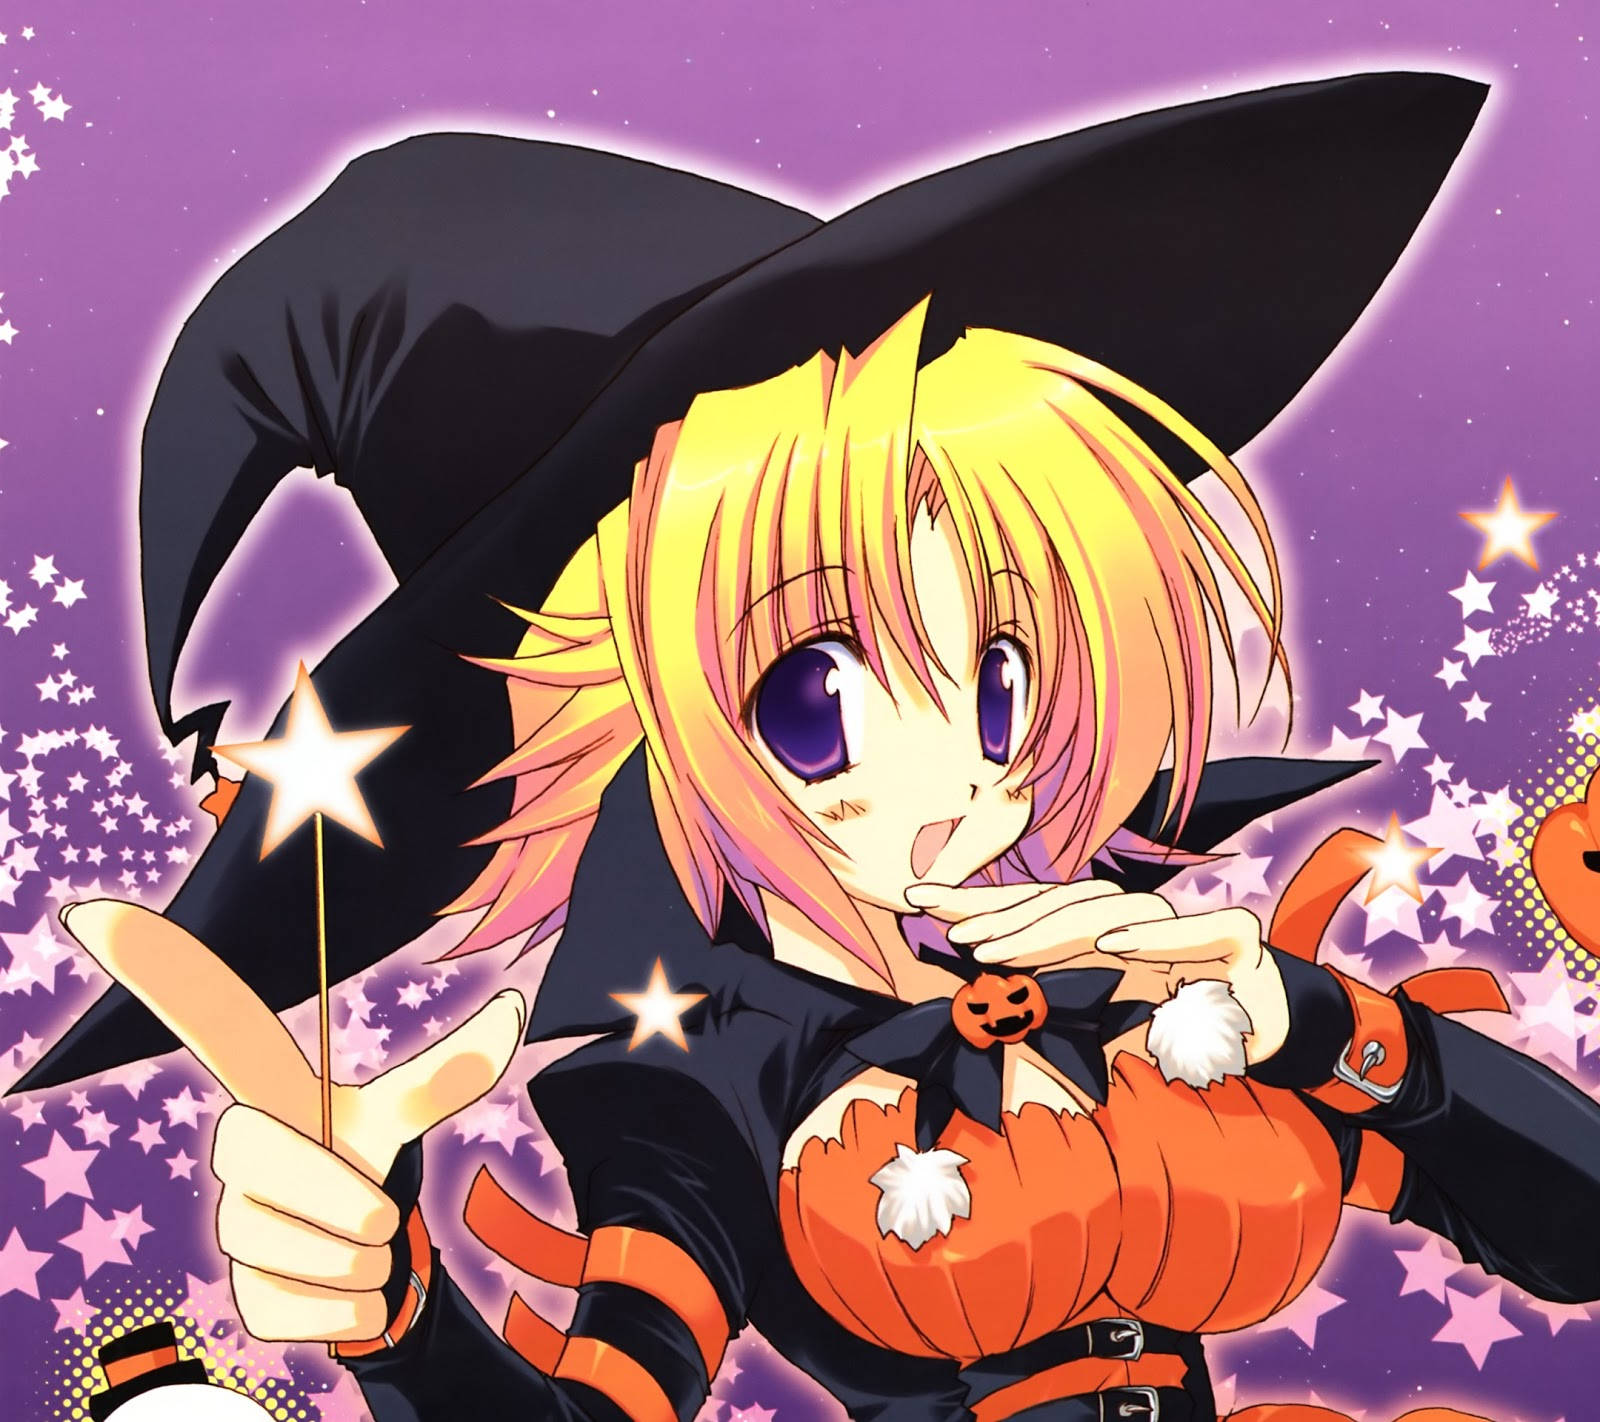 Join the spooky fun and explore the dark side of anime this Halloween! Wallpaper